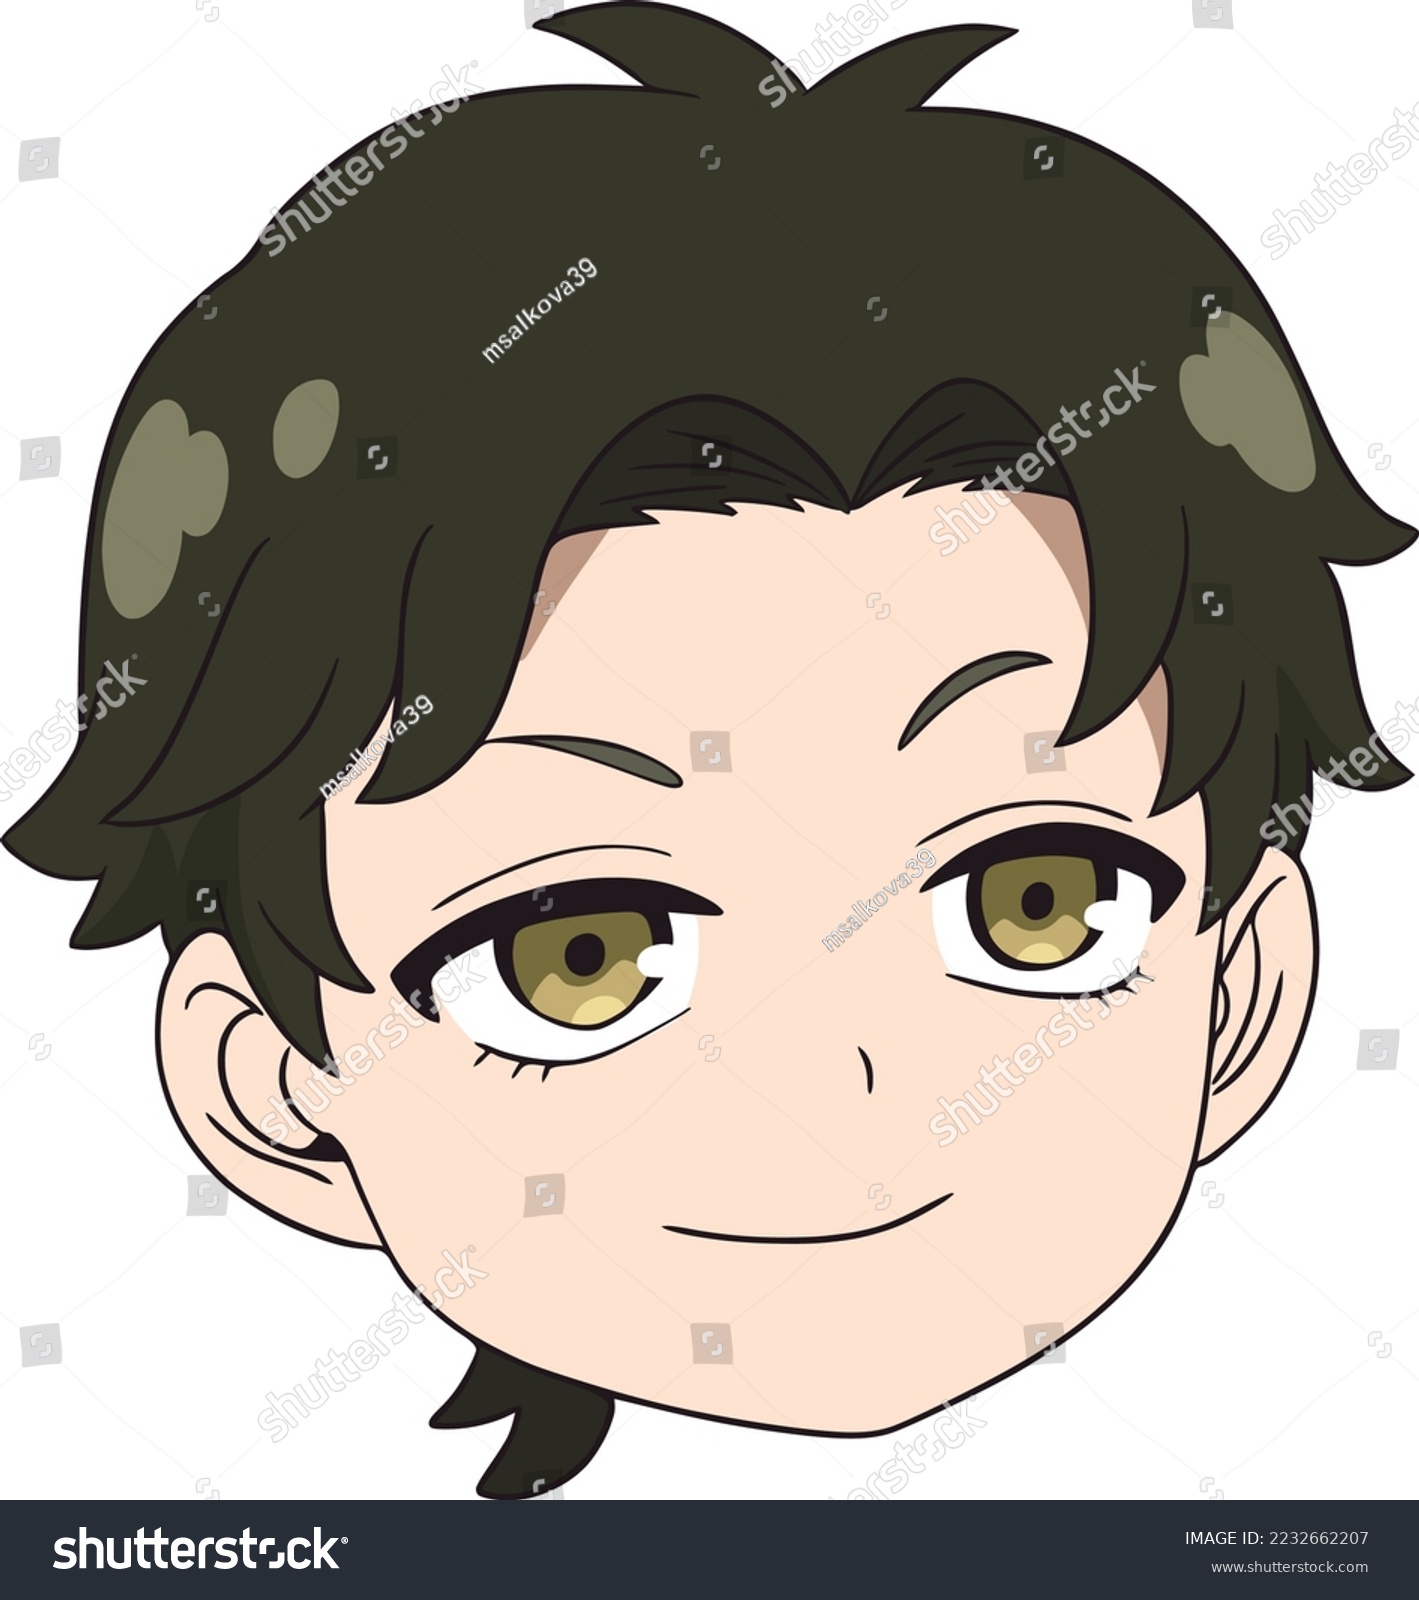 SVG of Boy with green hair and golden eyes, looks to the right, smiles, white background, head only svg